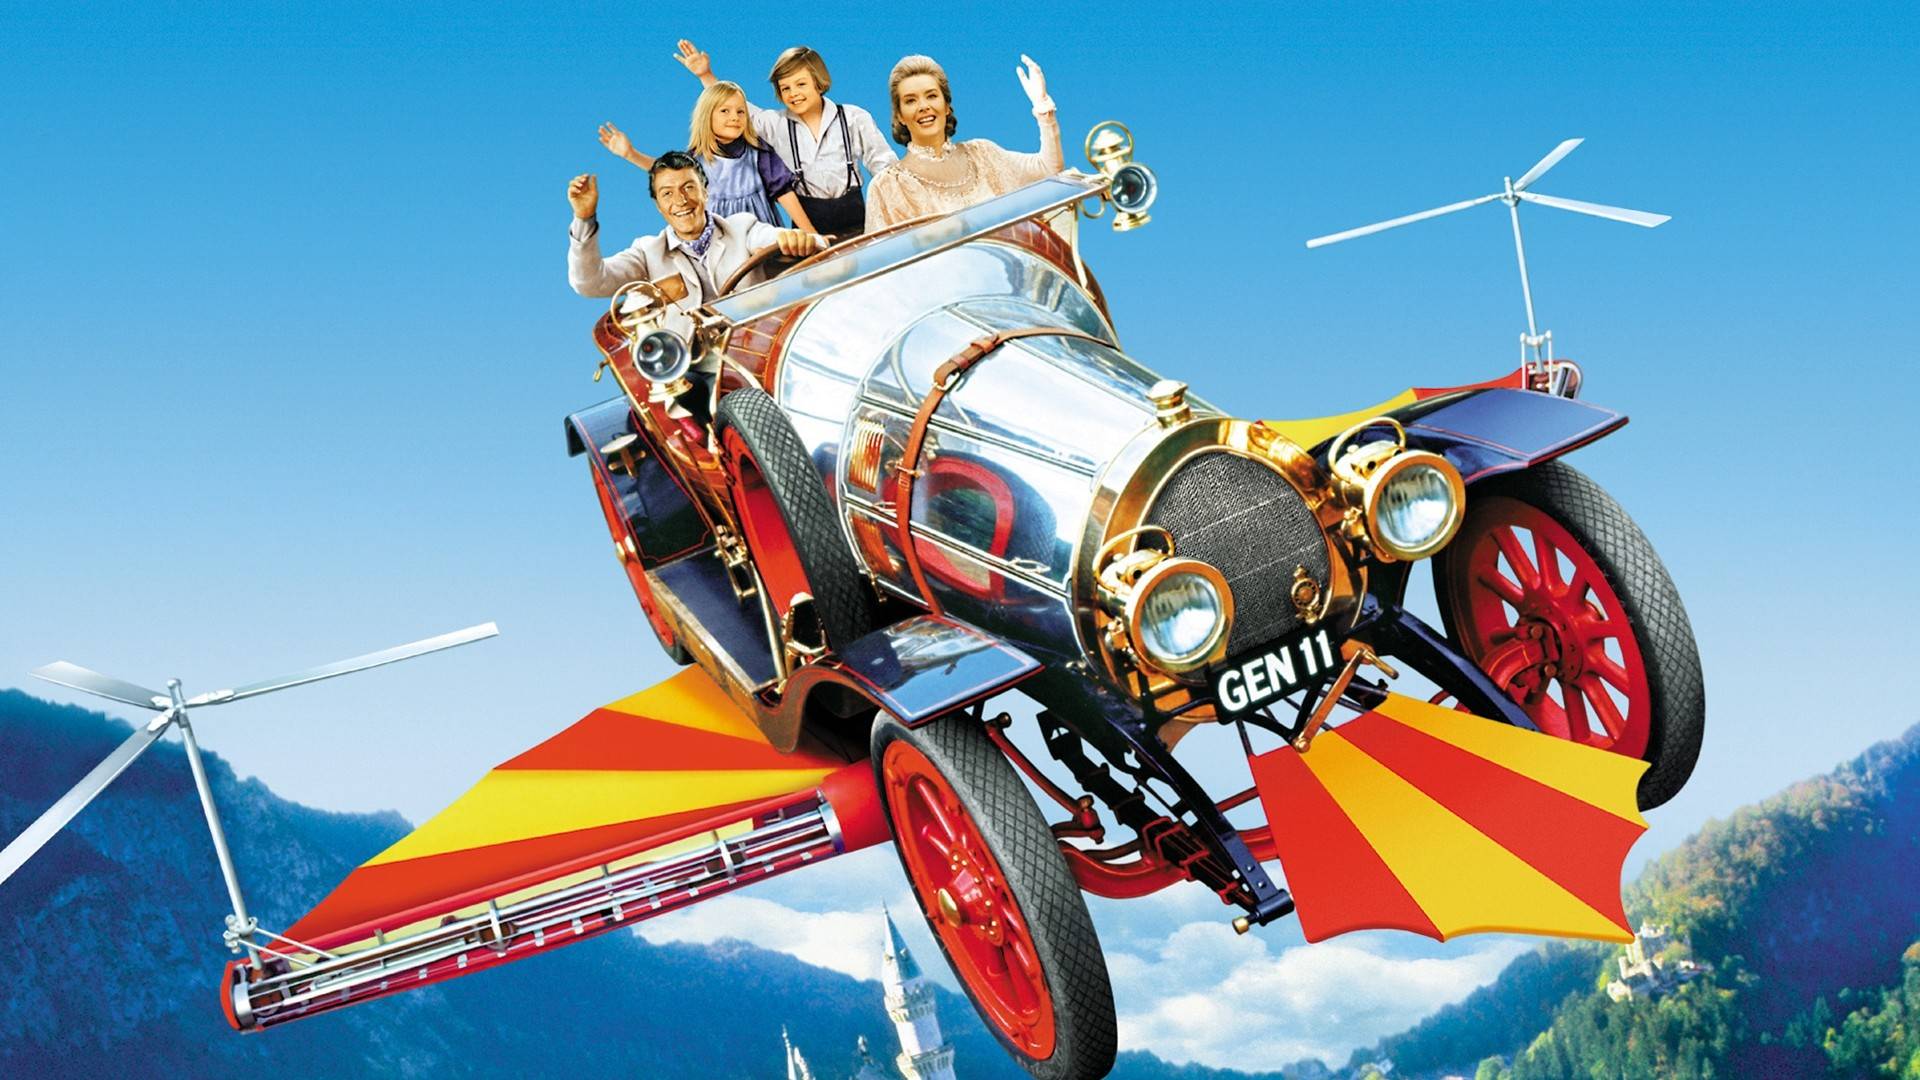 who wrote the book on which chitty chitty bang bang 1968 is based